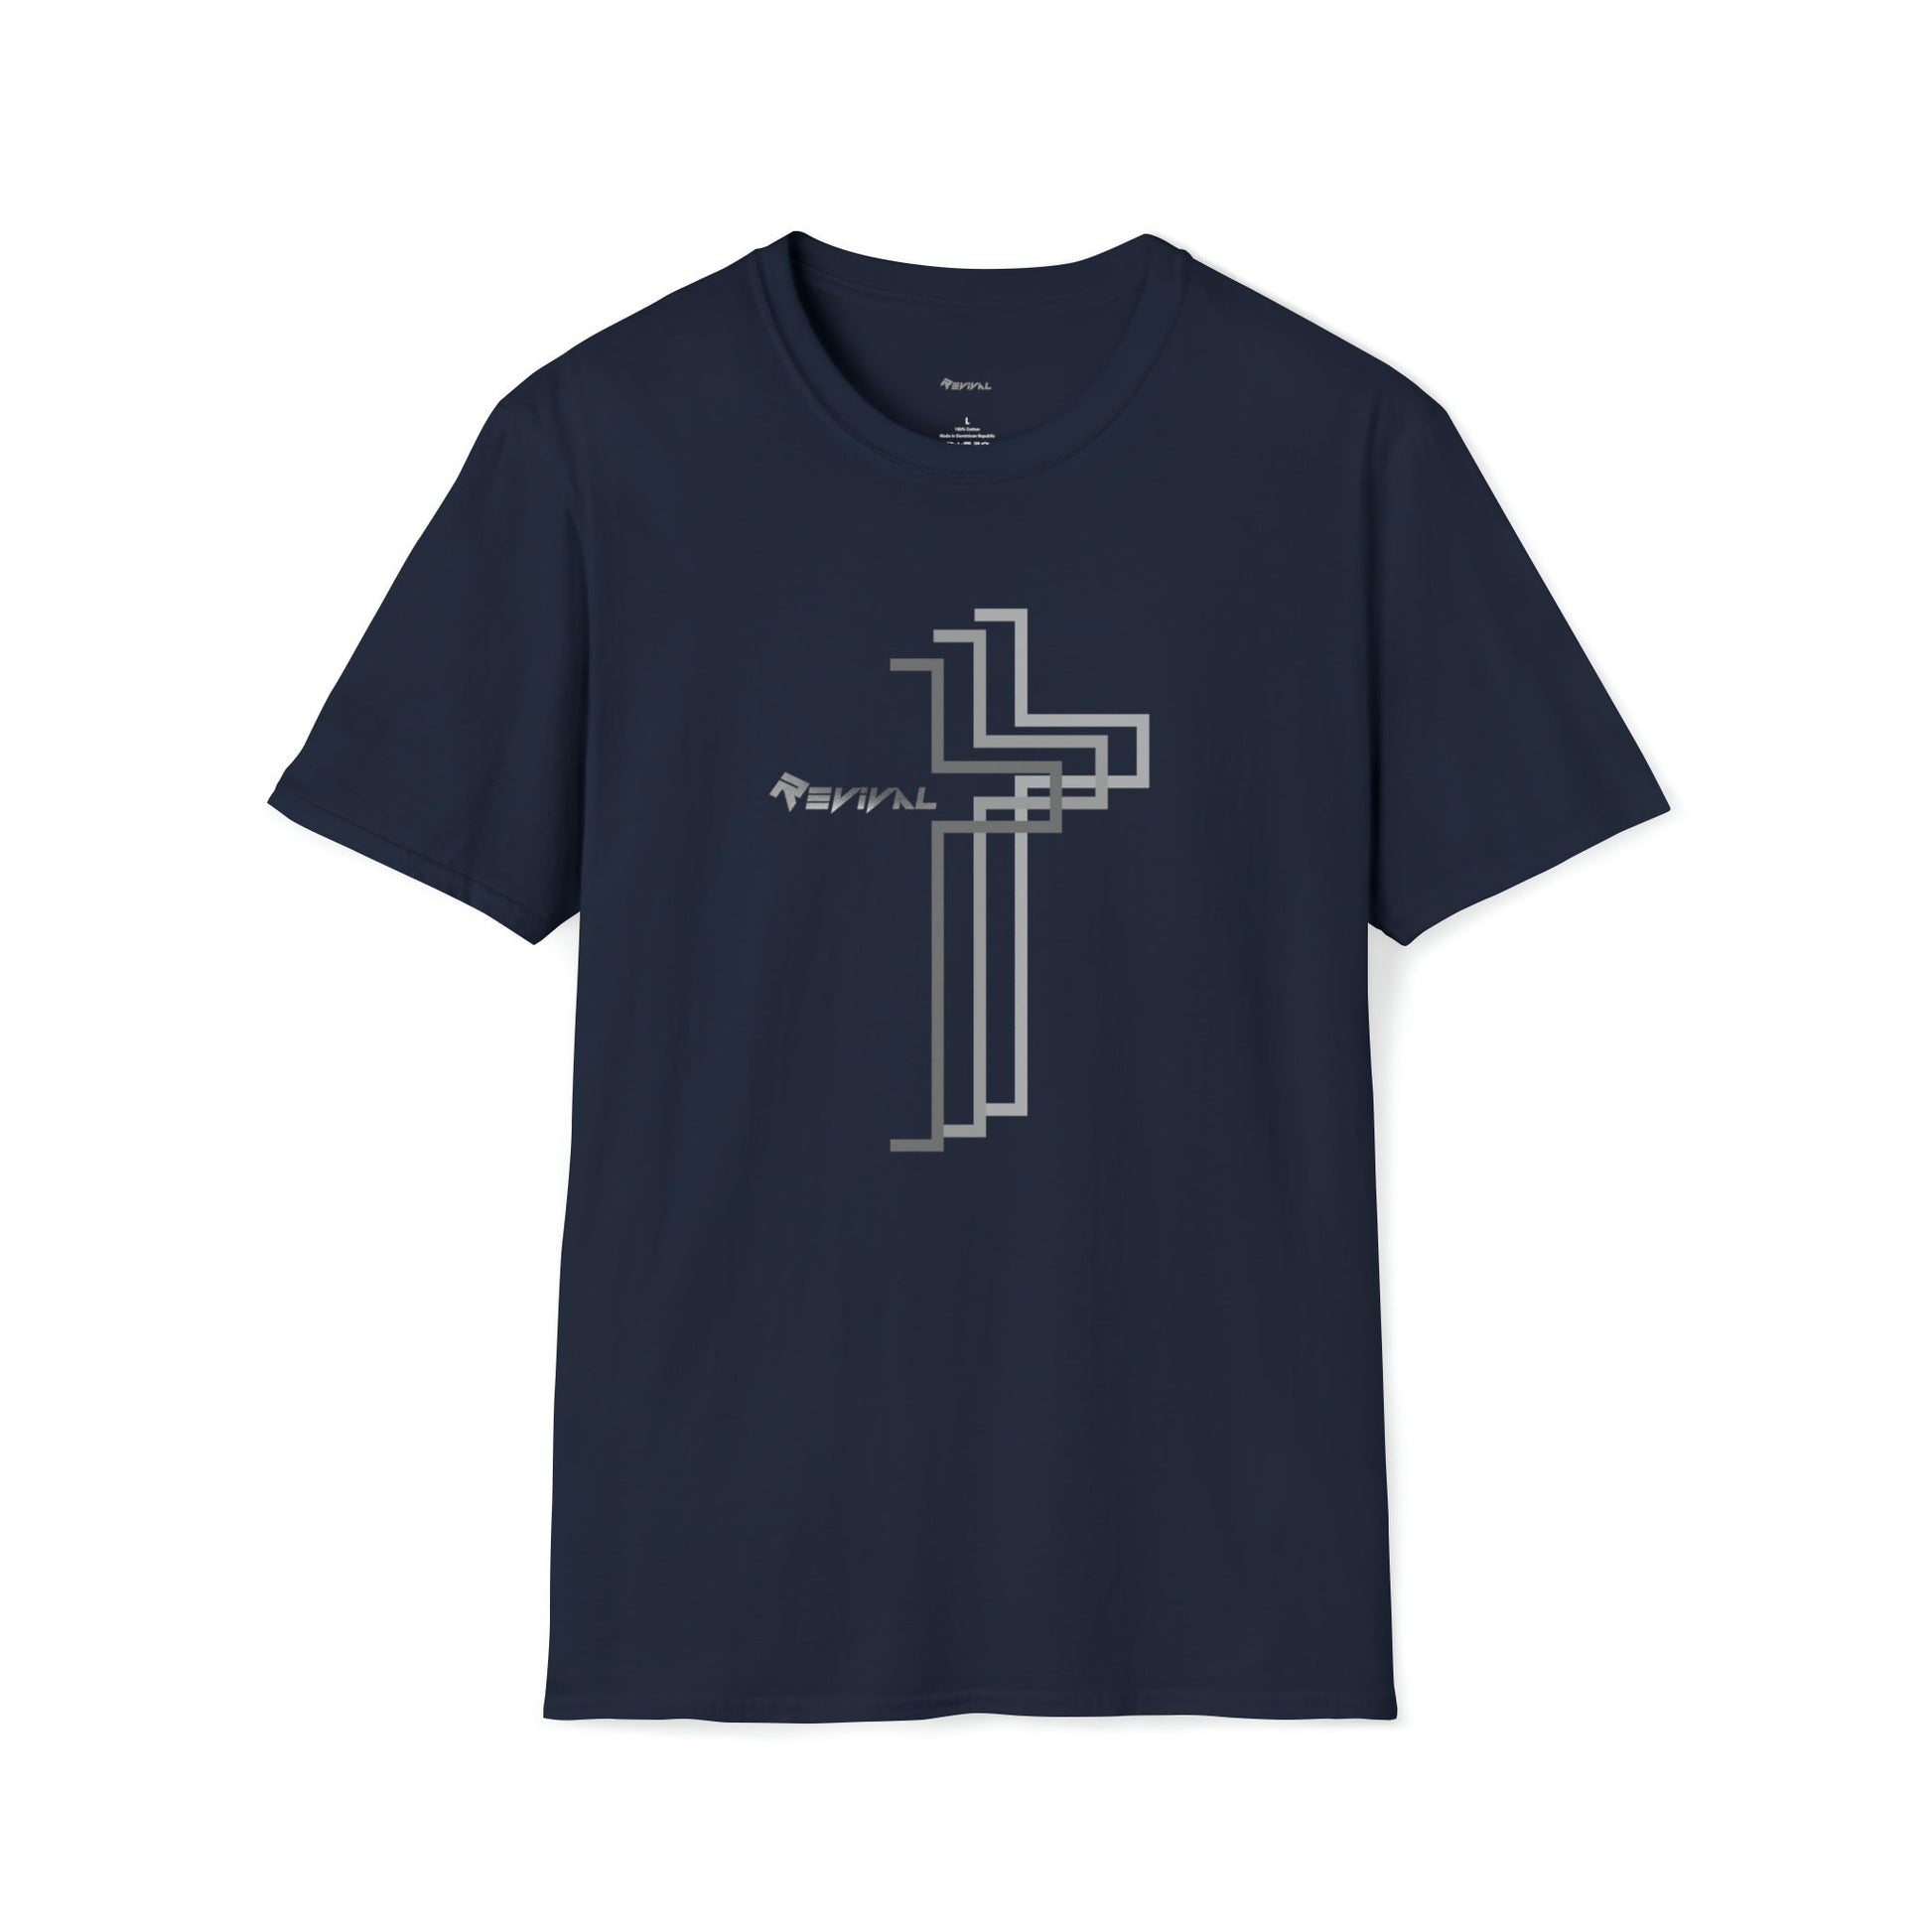 Grey Calvary Intersection by Revival Short sleeve T-Shirt, Comfortable, soft Tee, Gift for Men and Women